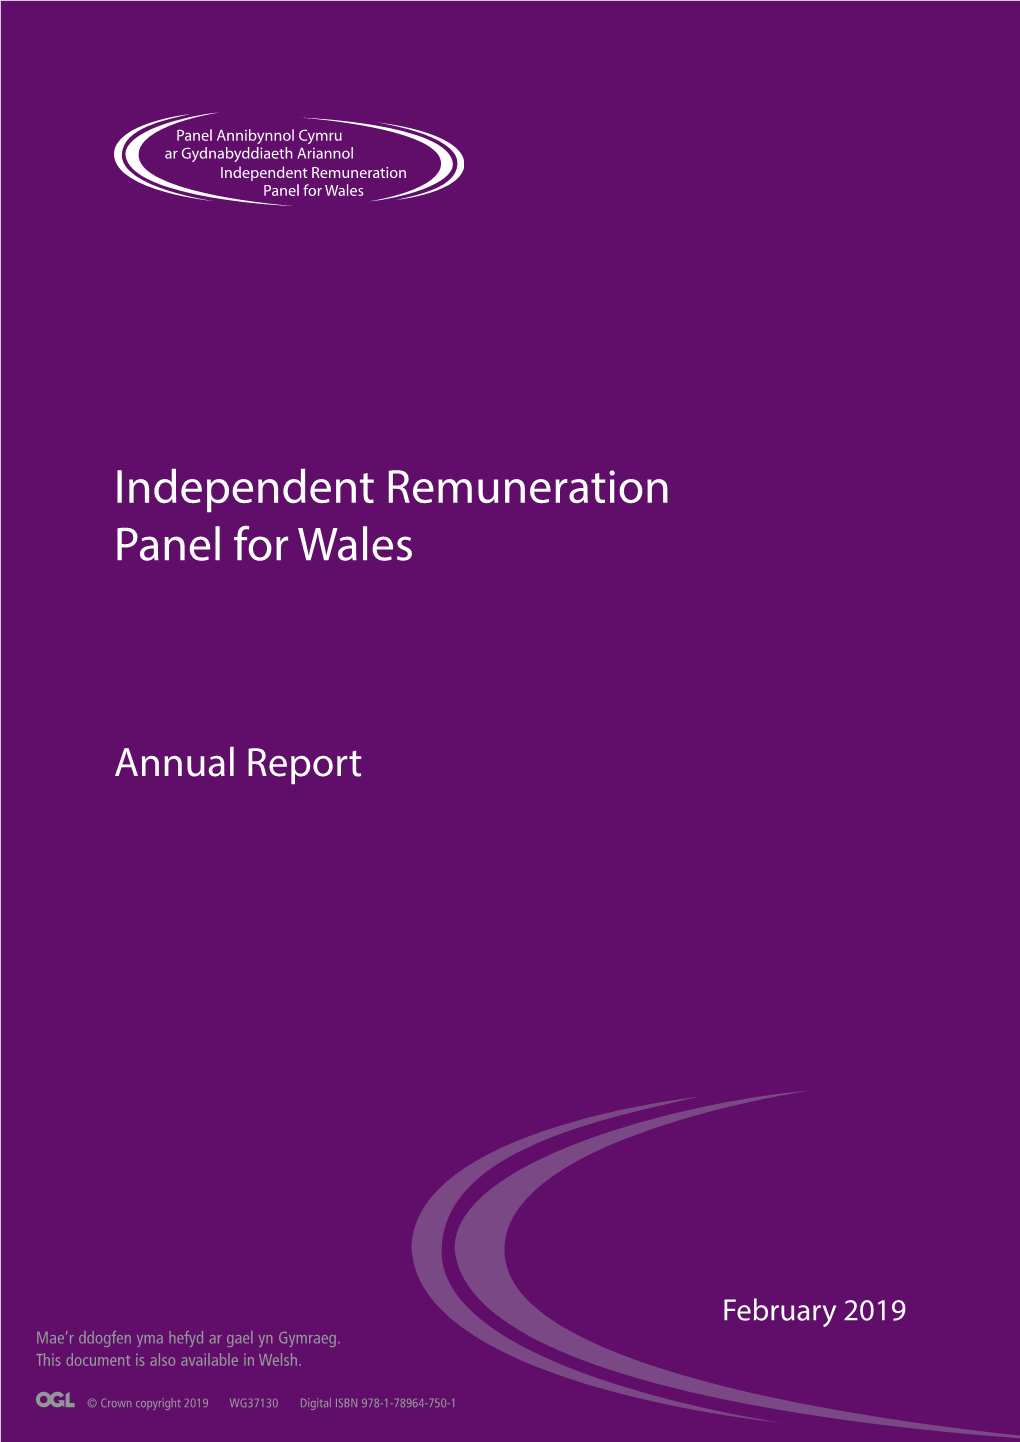 Independent Remuneration Panel for Wales, Annual Report 2019